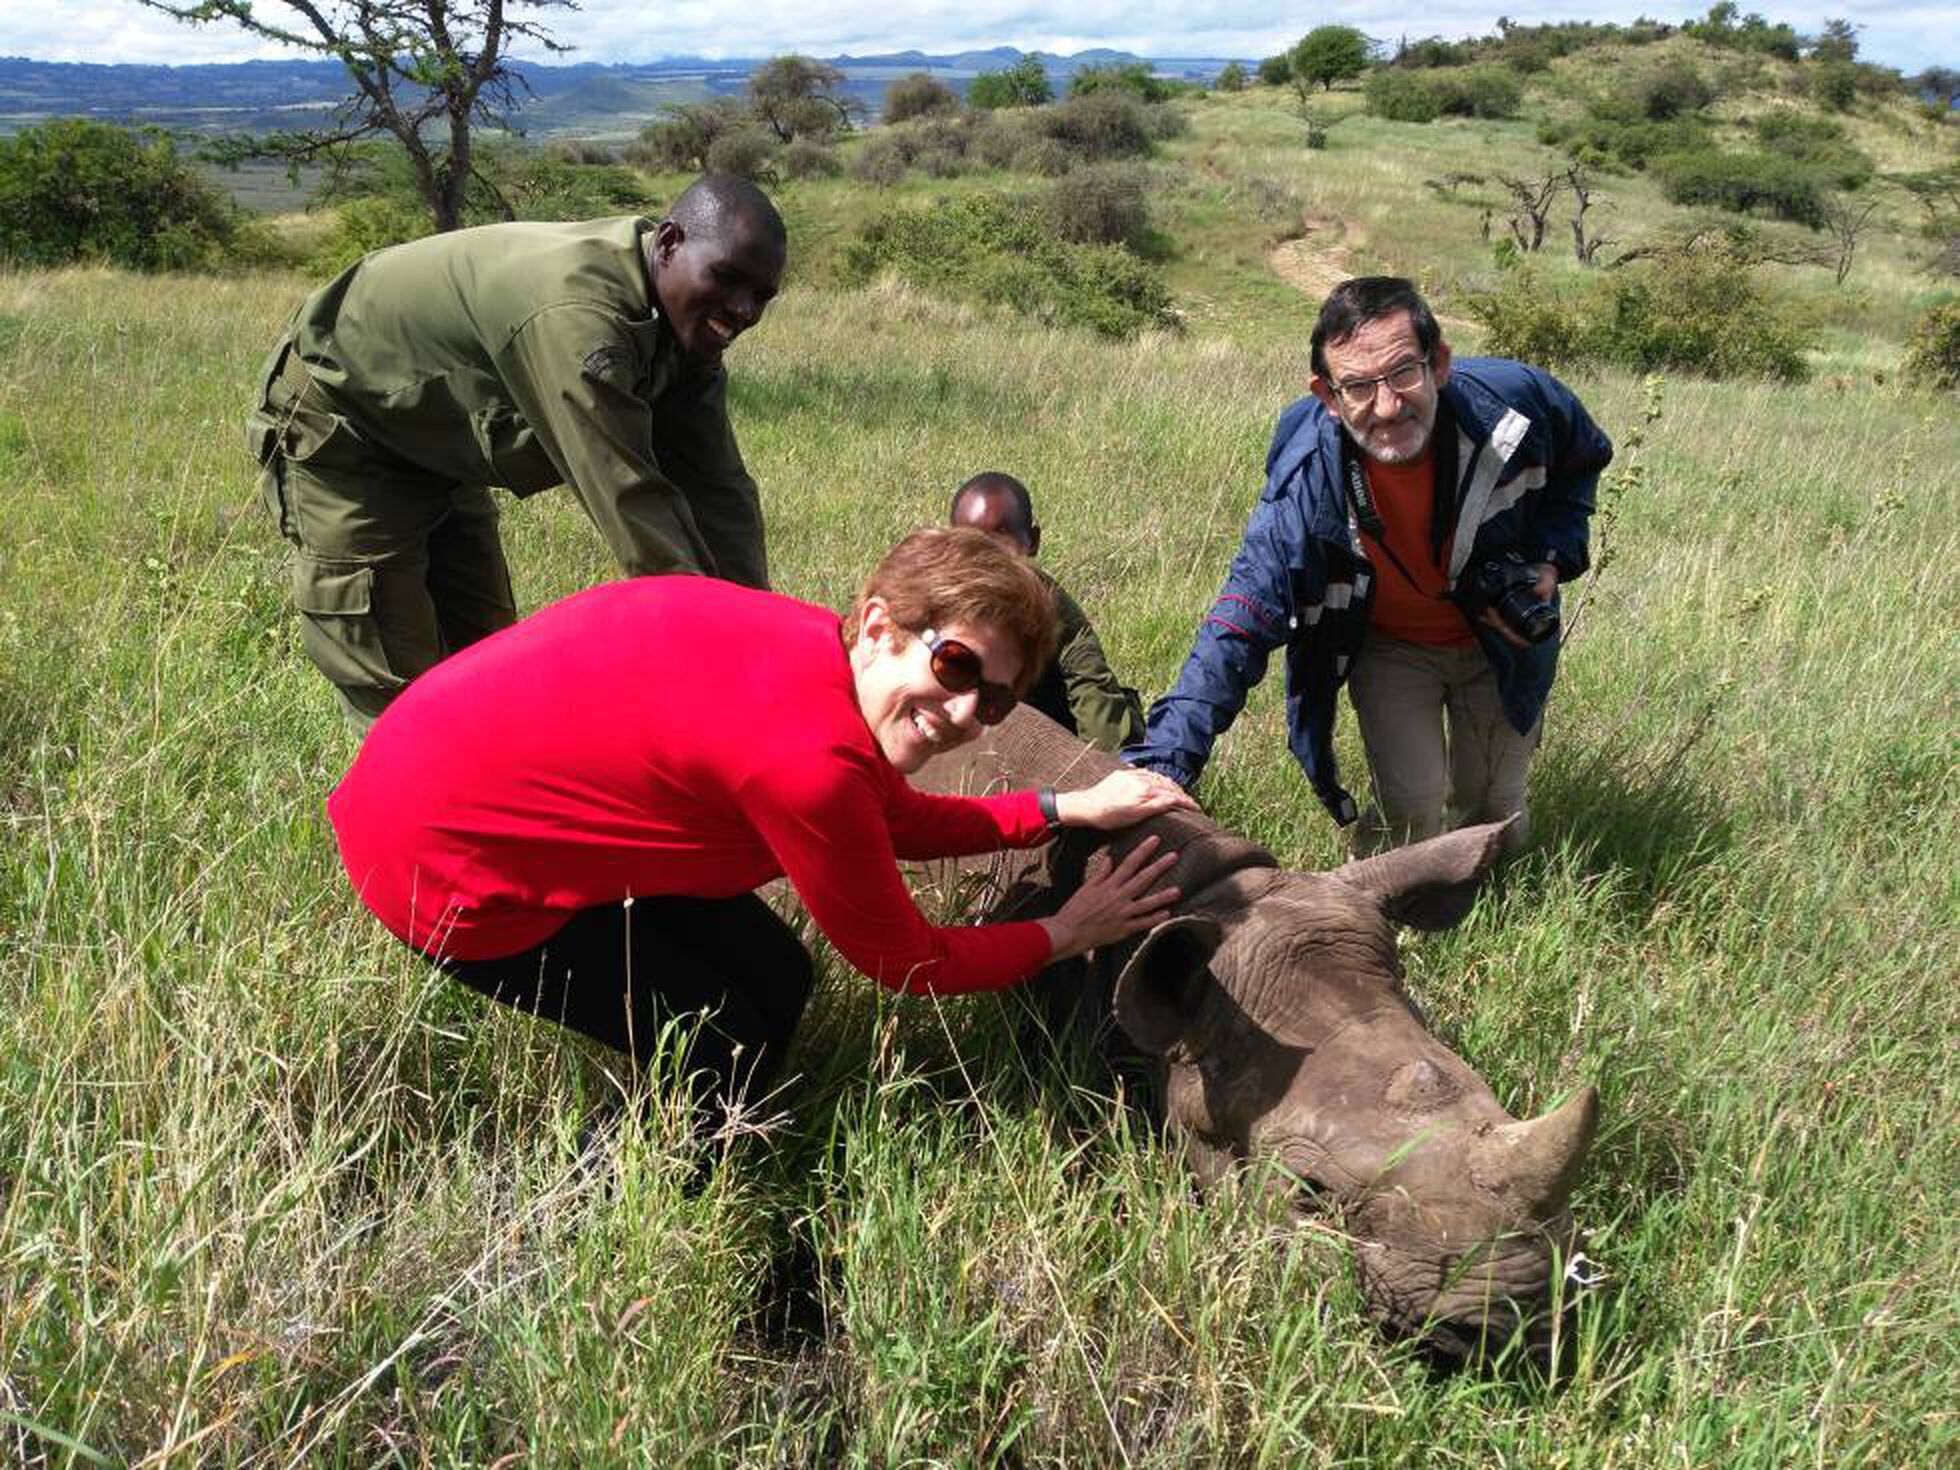 Endangered species: Meet the Spaniards fighting to save elephants and  rhinos in Kenya | Spain | EL PAÍS English Edition